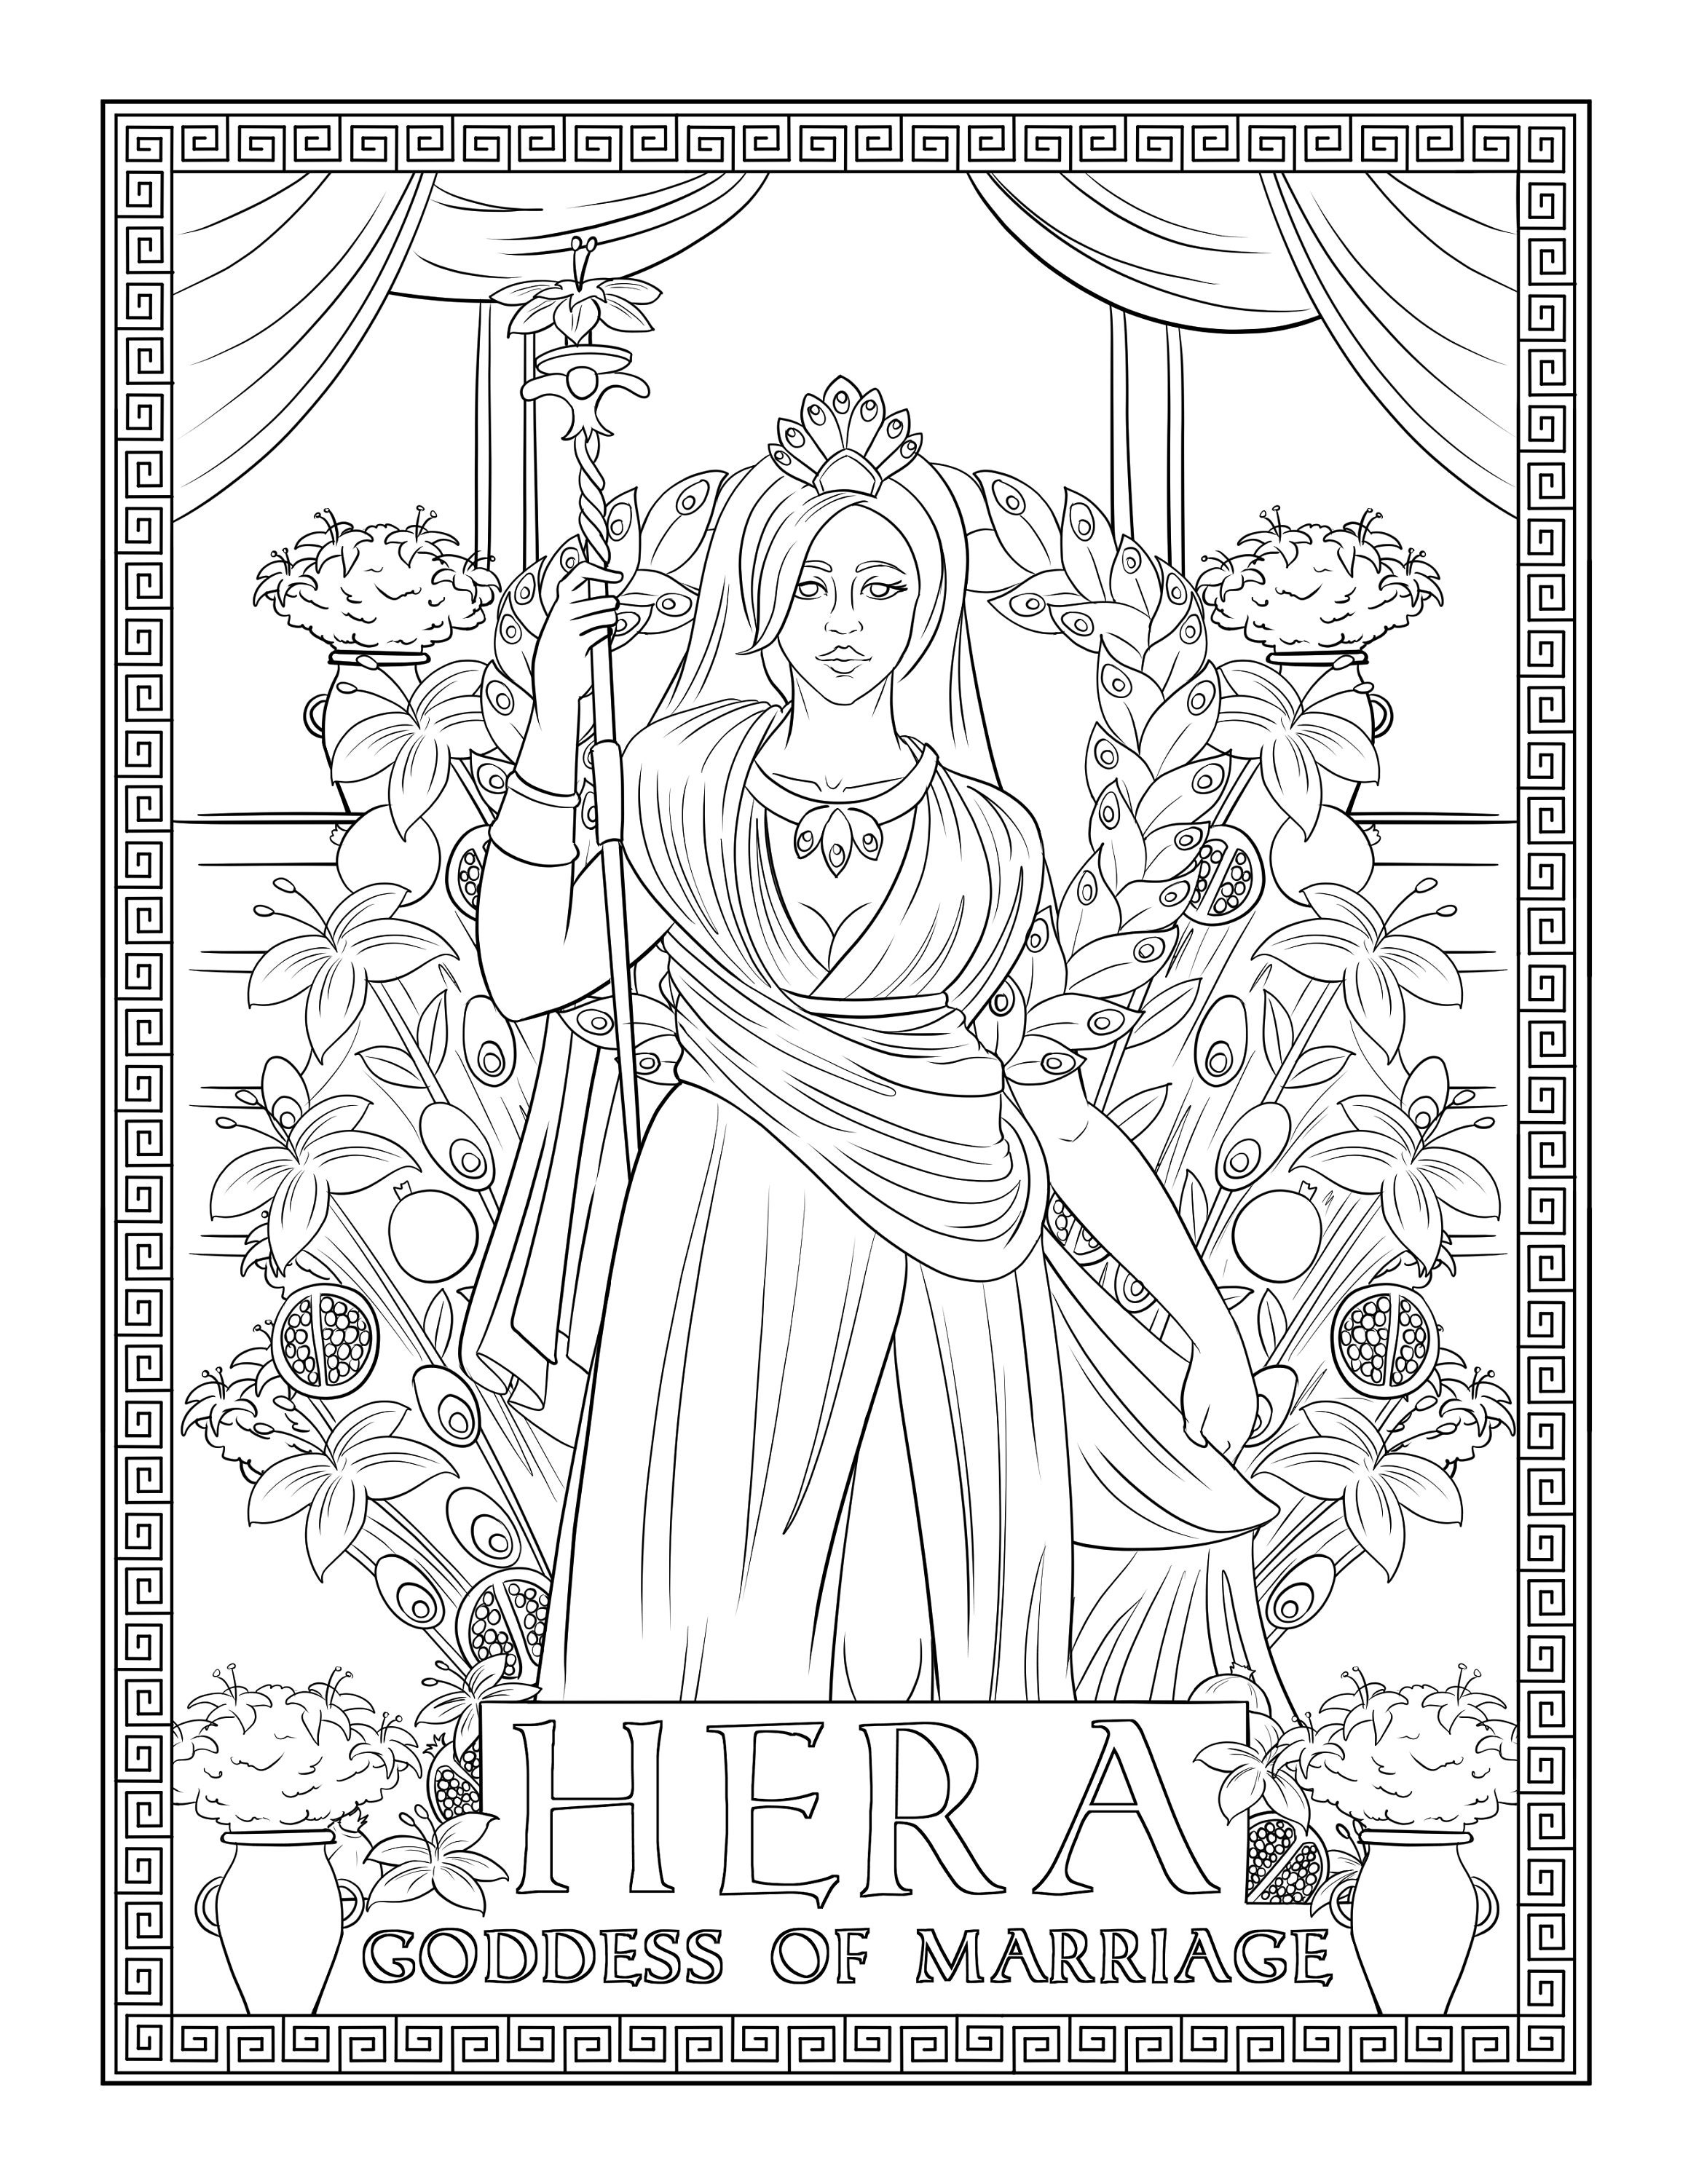 Greek goddesses group coloring pages downloadprintable download now